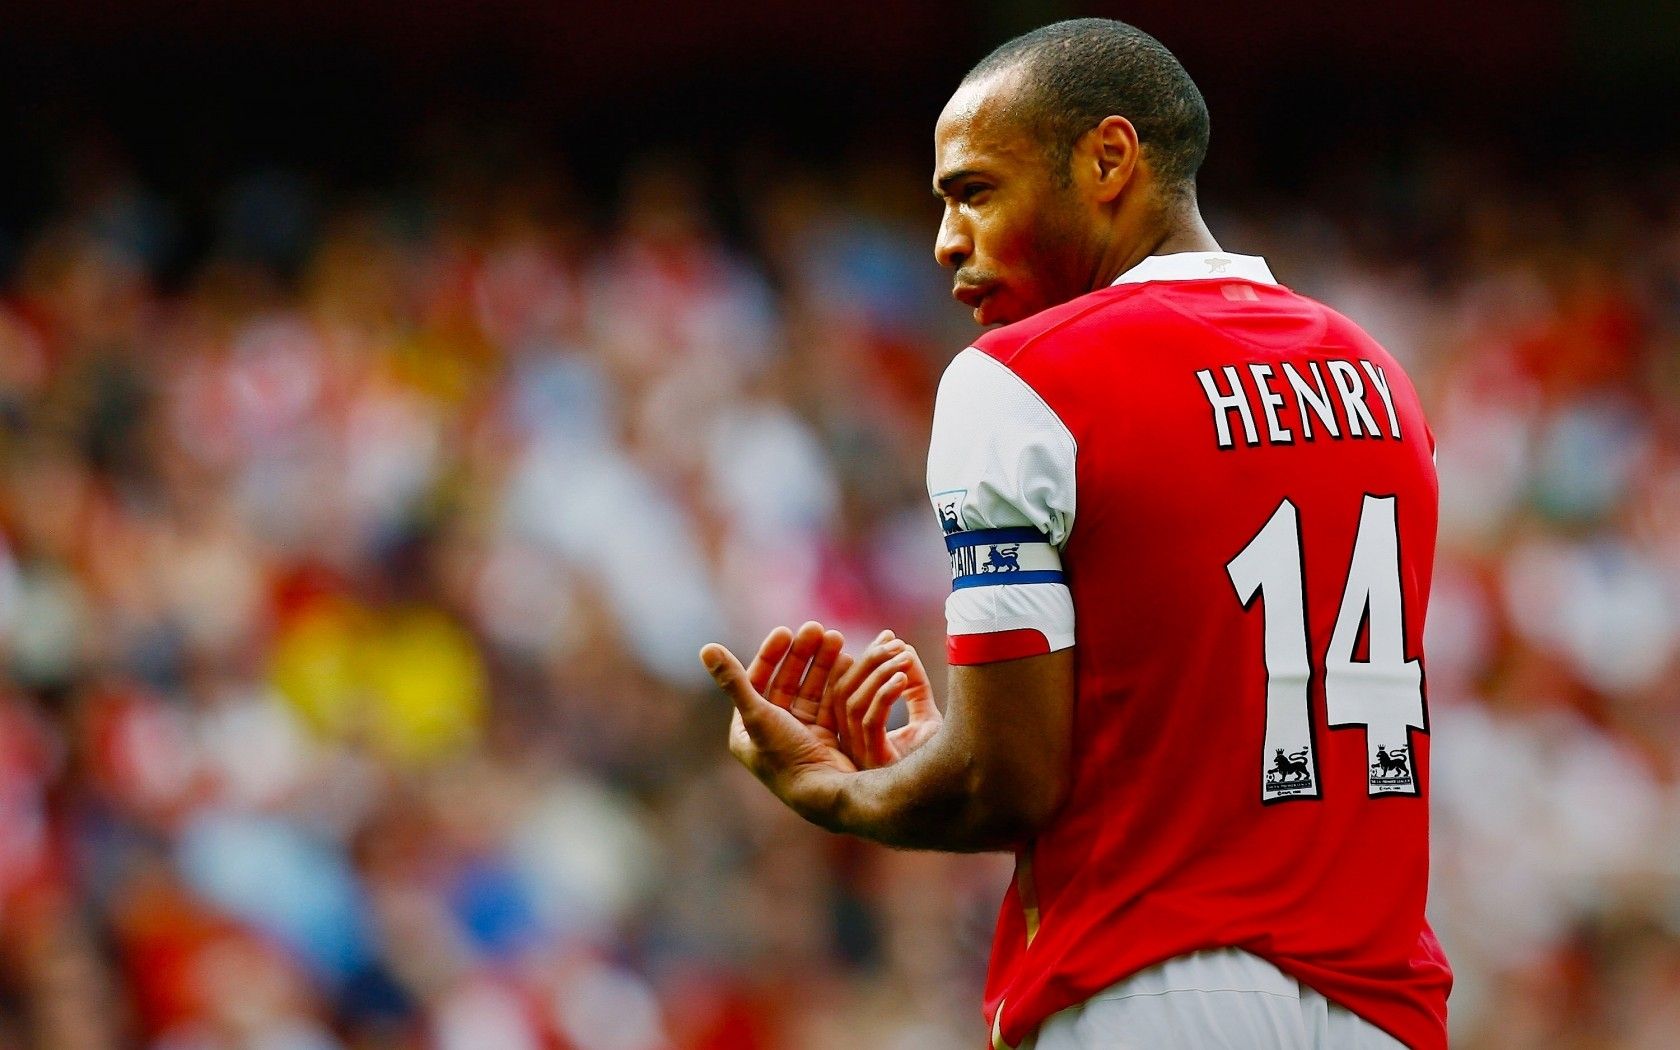 thierry henry, henry, arsenal Wallpaper, HD Sports 4K Wallpaper, Image, Photo and Background